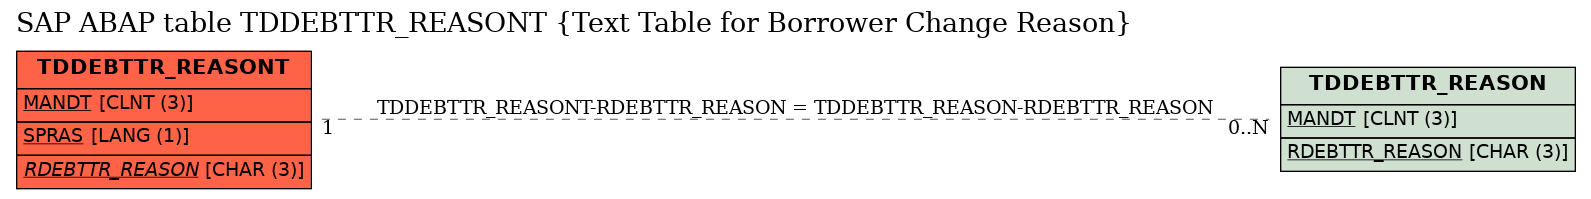 E-R Diagram for table TDDEBTTR_REASONT (Text Table for Borrower Change Reason)